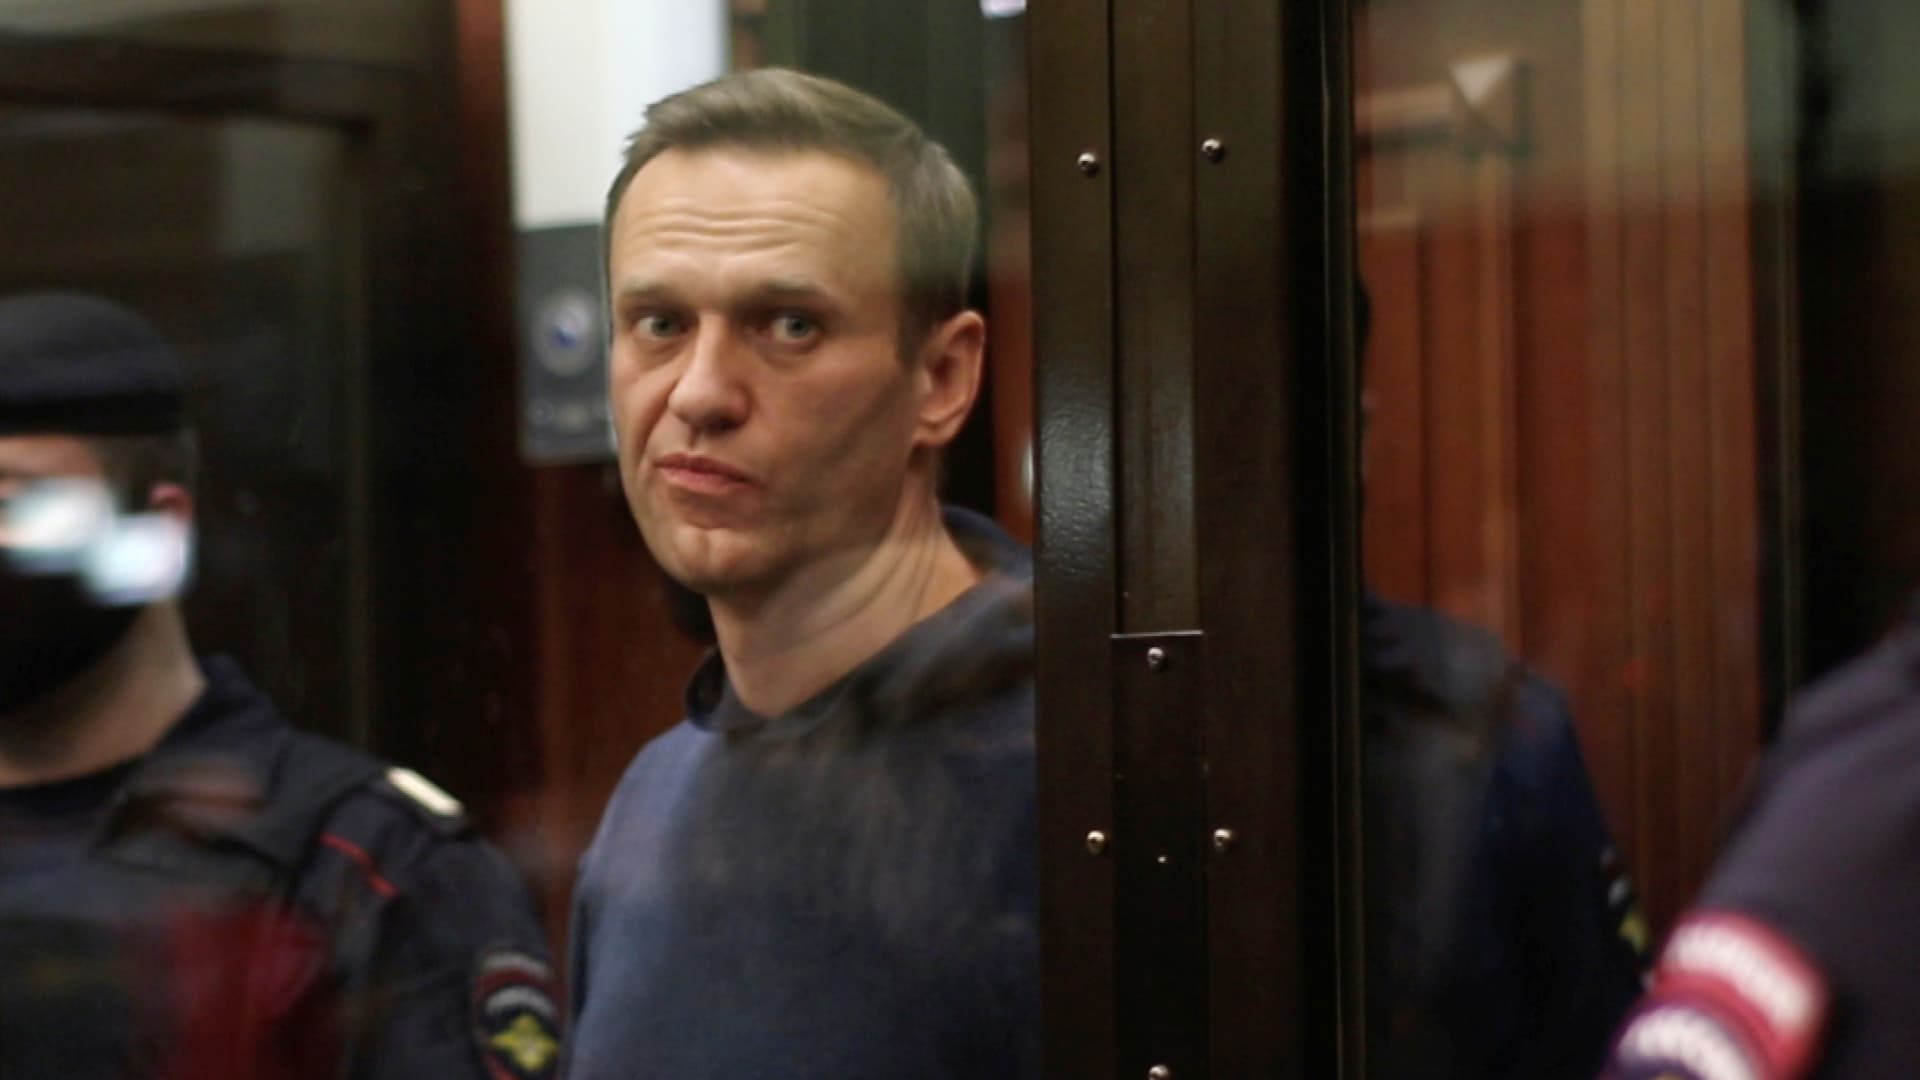 A still image taken from video footage shows Russian opposition leader Alexei Navalny, who is accused of flouting the terms of a suspended sentence for embezzlement, during the announcement of a court verdict in Moscow, Russia February 2, 2021.